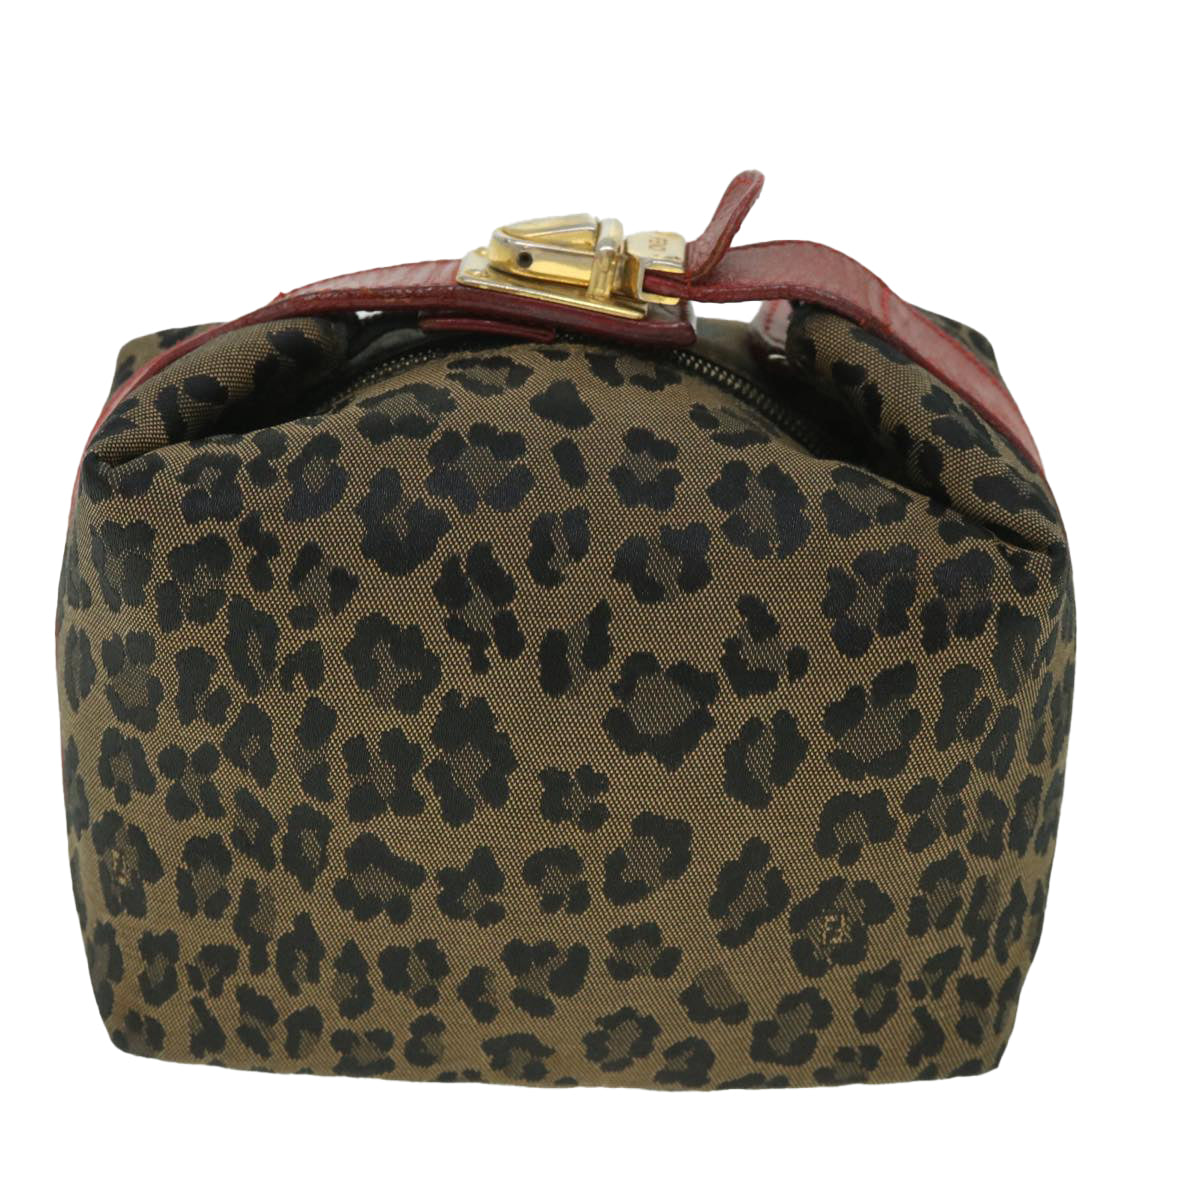 FENDI Leopard Hand Bag Brown Red Auth 55755 - 0